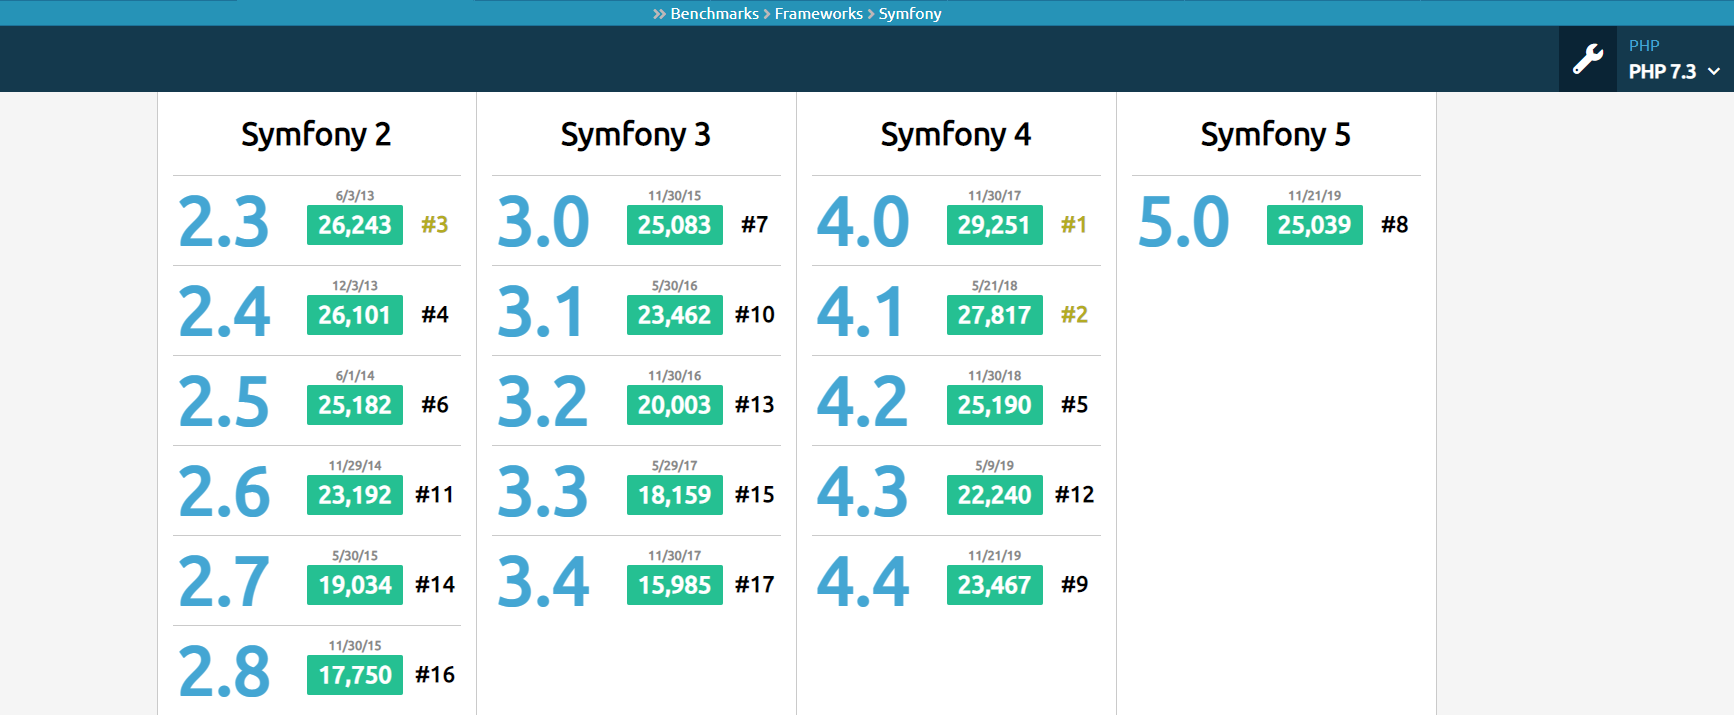 Comparison of the Symfony versions on the PHP Benchmarks website